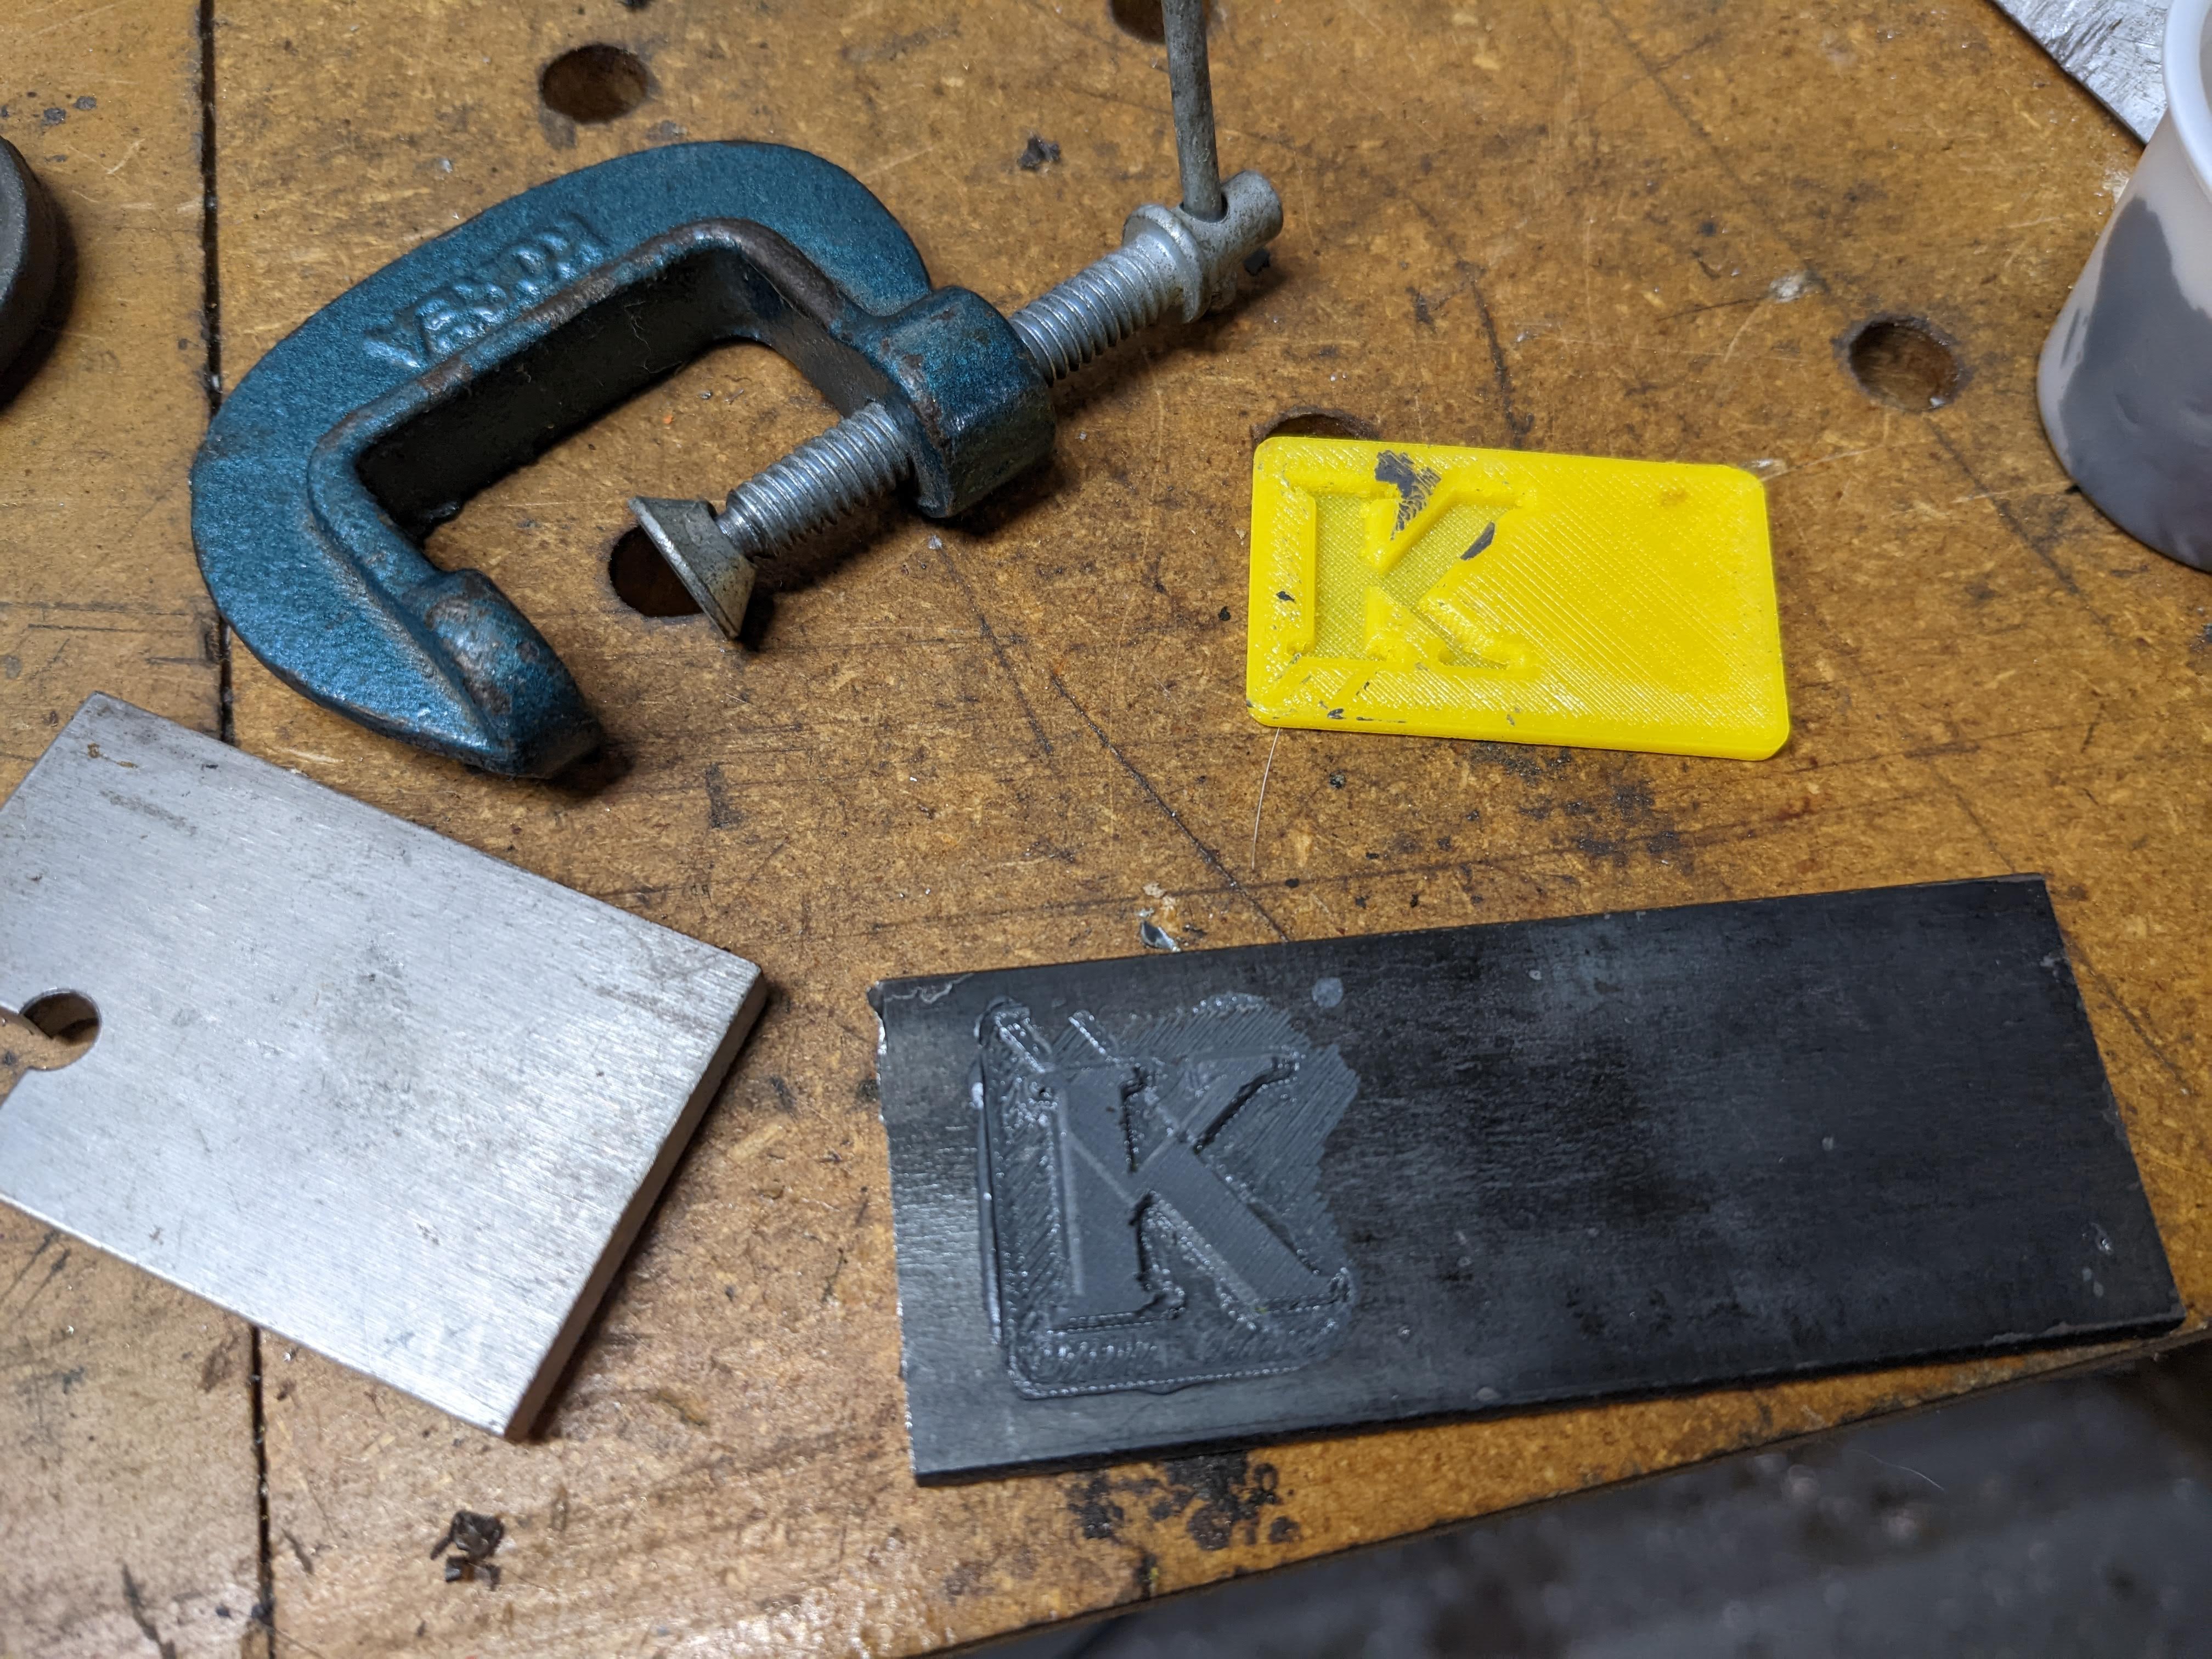 Cast Metal Lettering Effect - Fake Cast Lettering Mold Proof of Concept